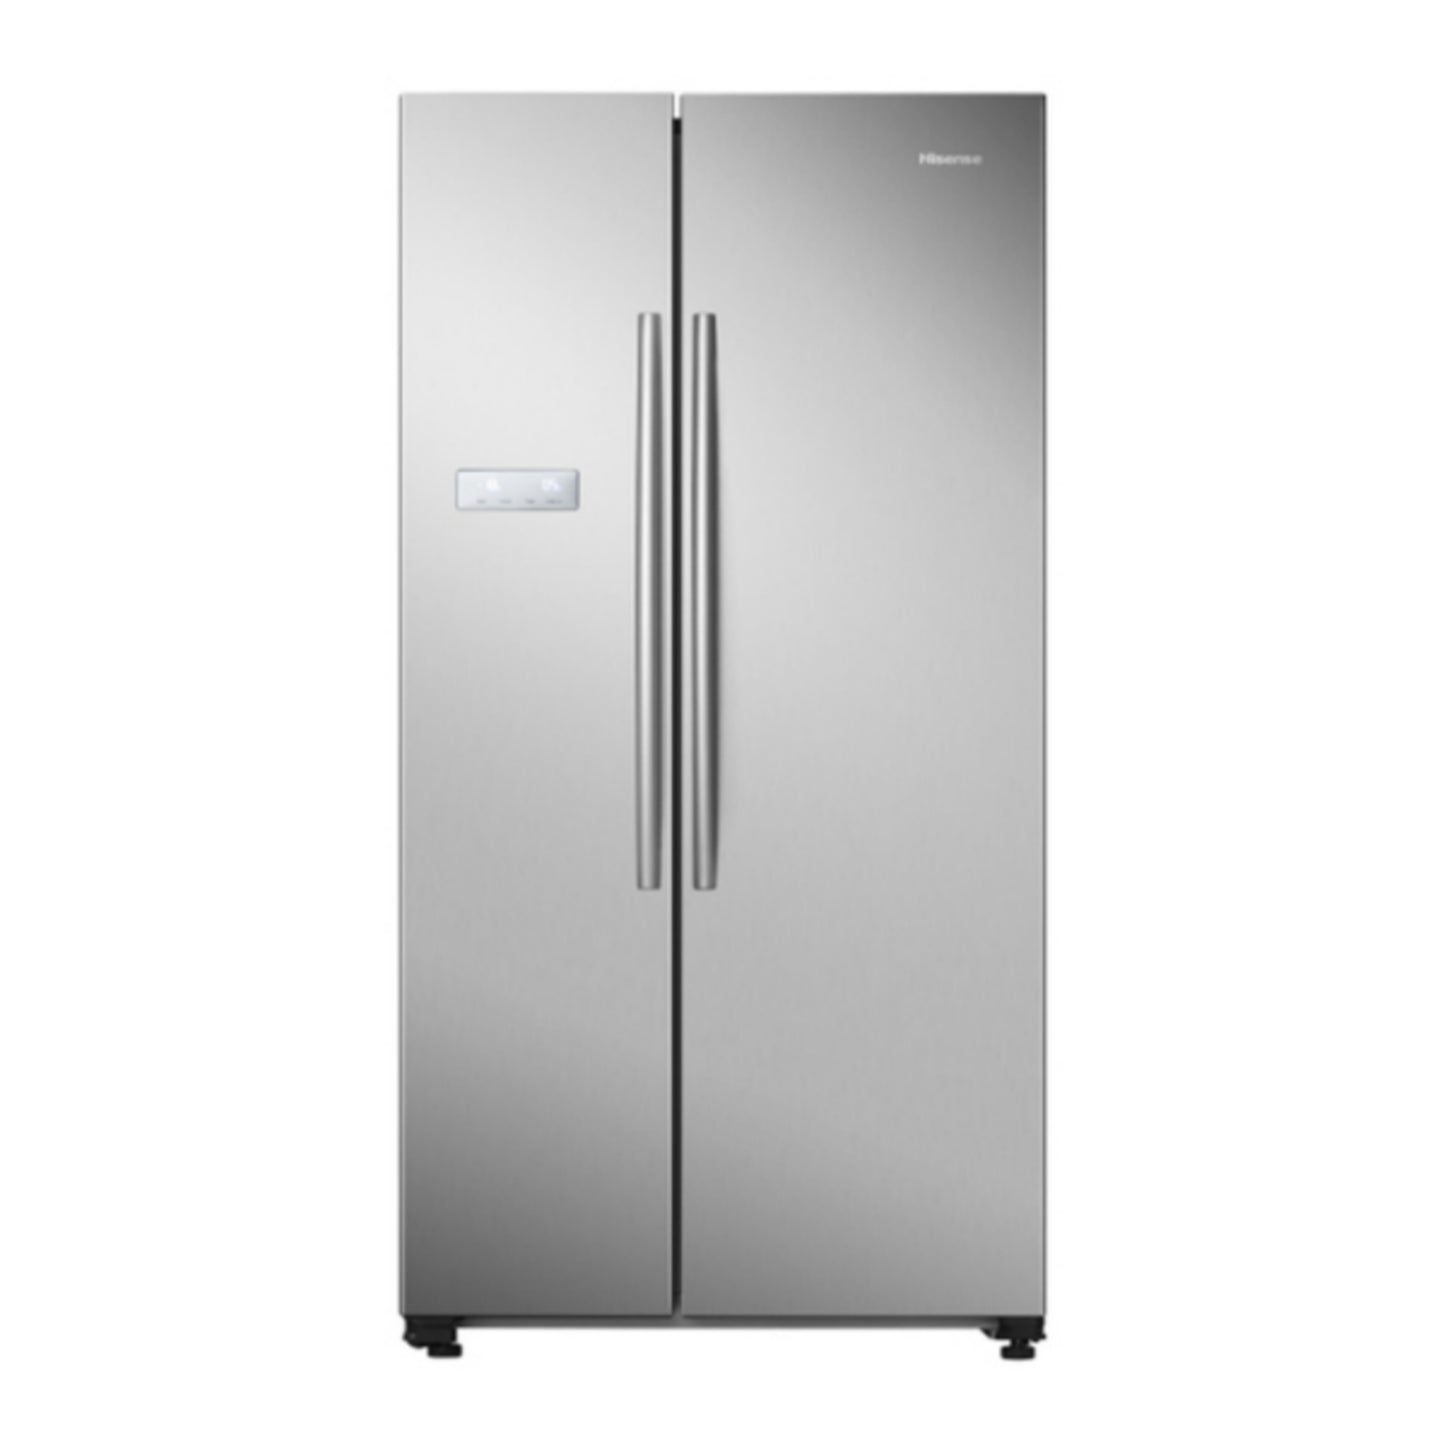 Hisense REF 76WSN 564L Side by Side Refrigerator with LED display + 1 Year Warranty - Brand New